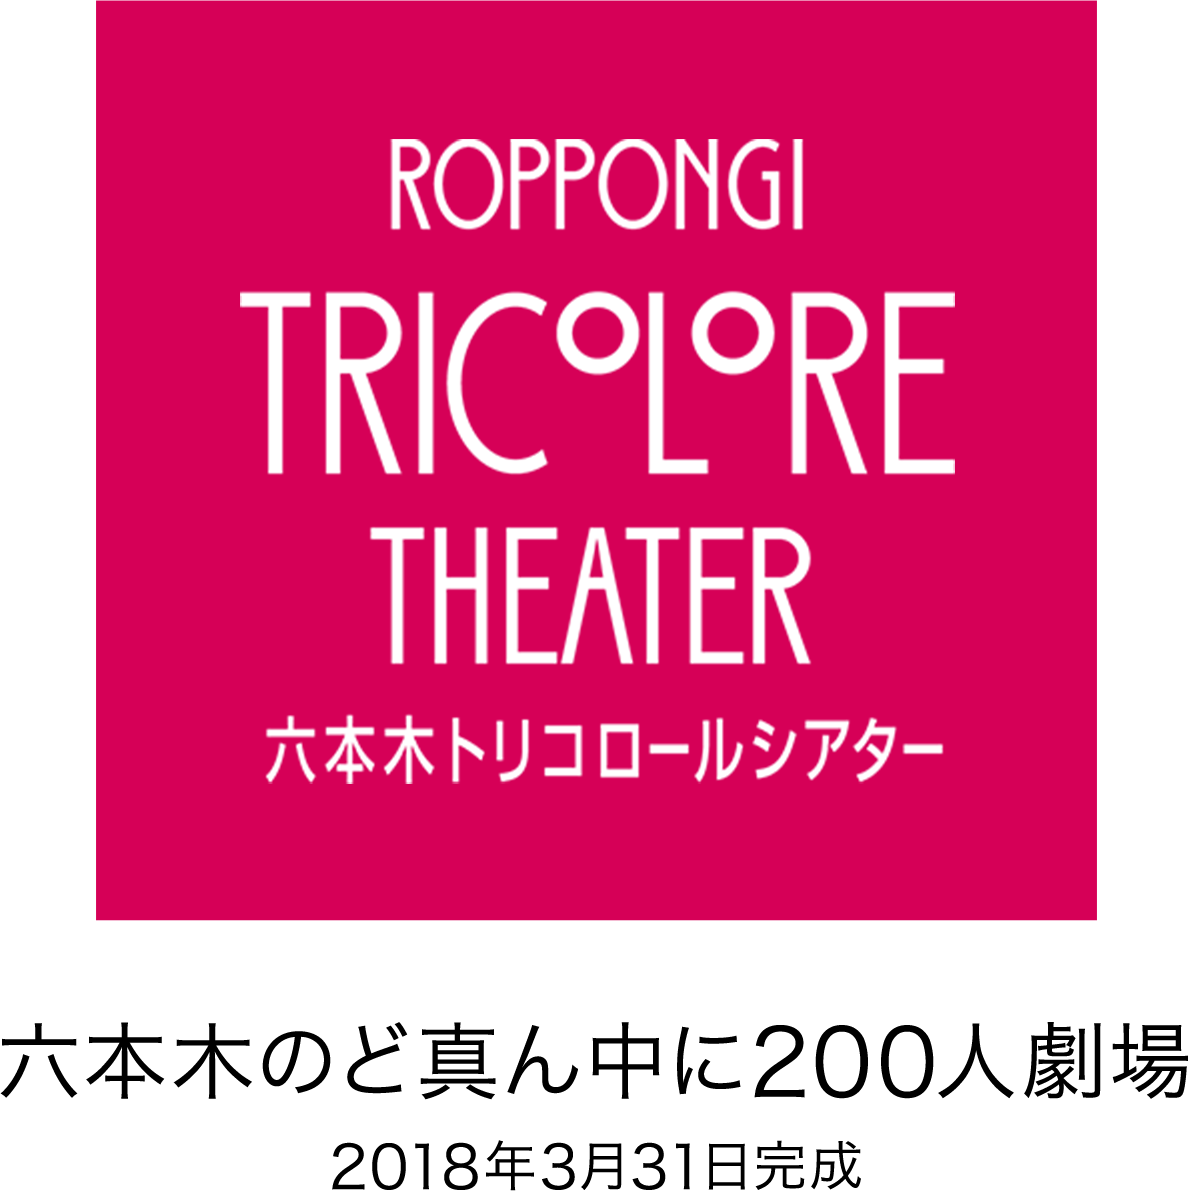 Roppongi Tricolore Theater 六本木のど真ん中に200人劇場　2018年3月31日完成